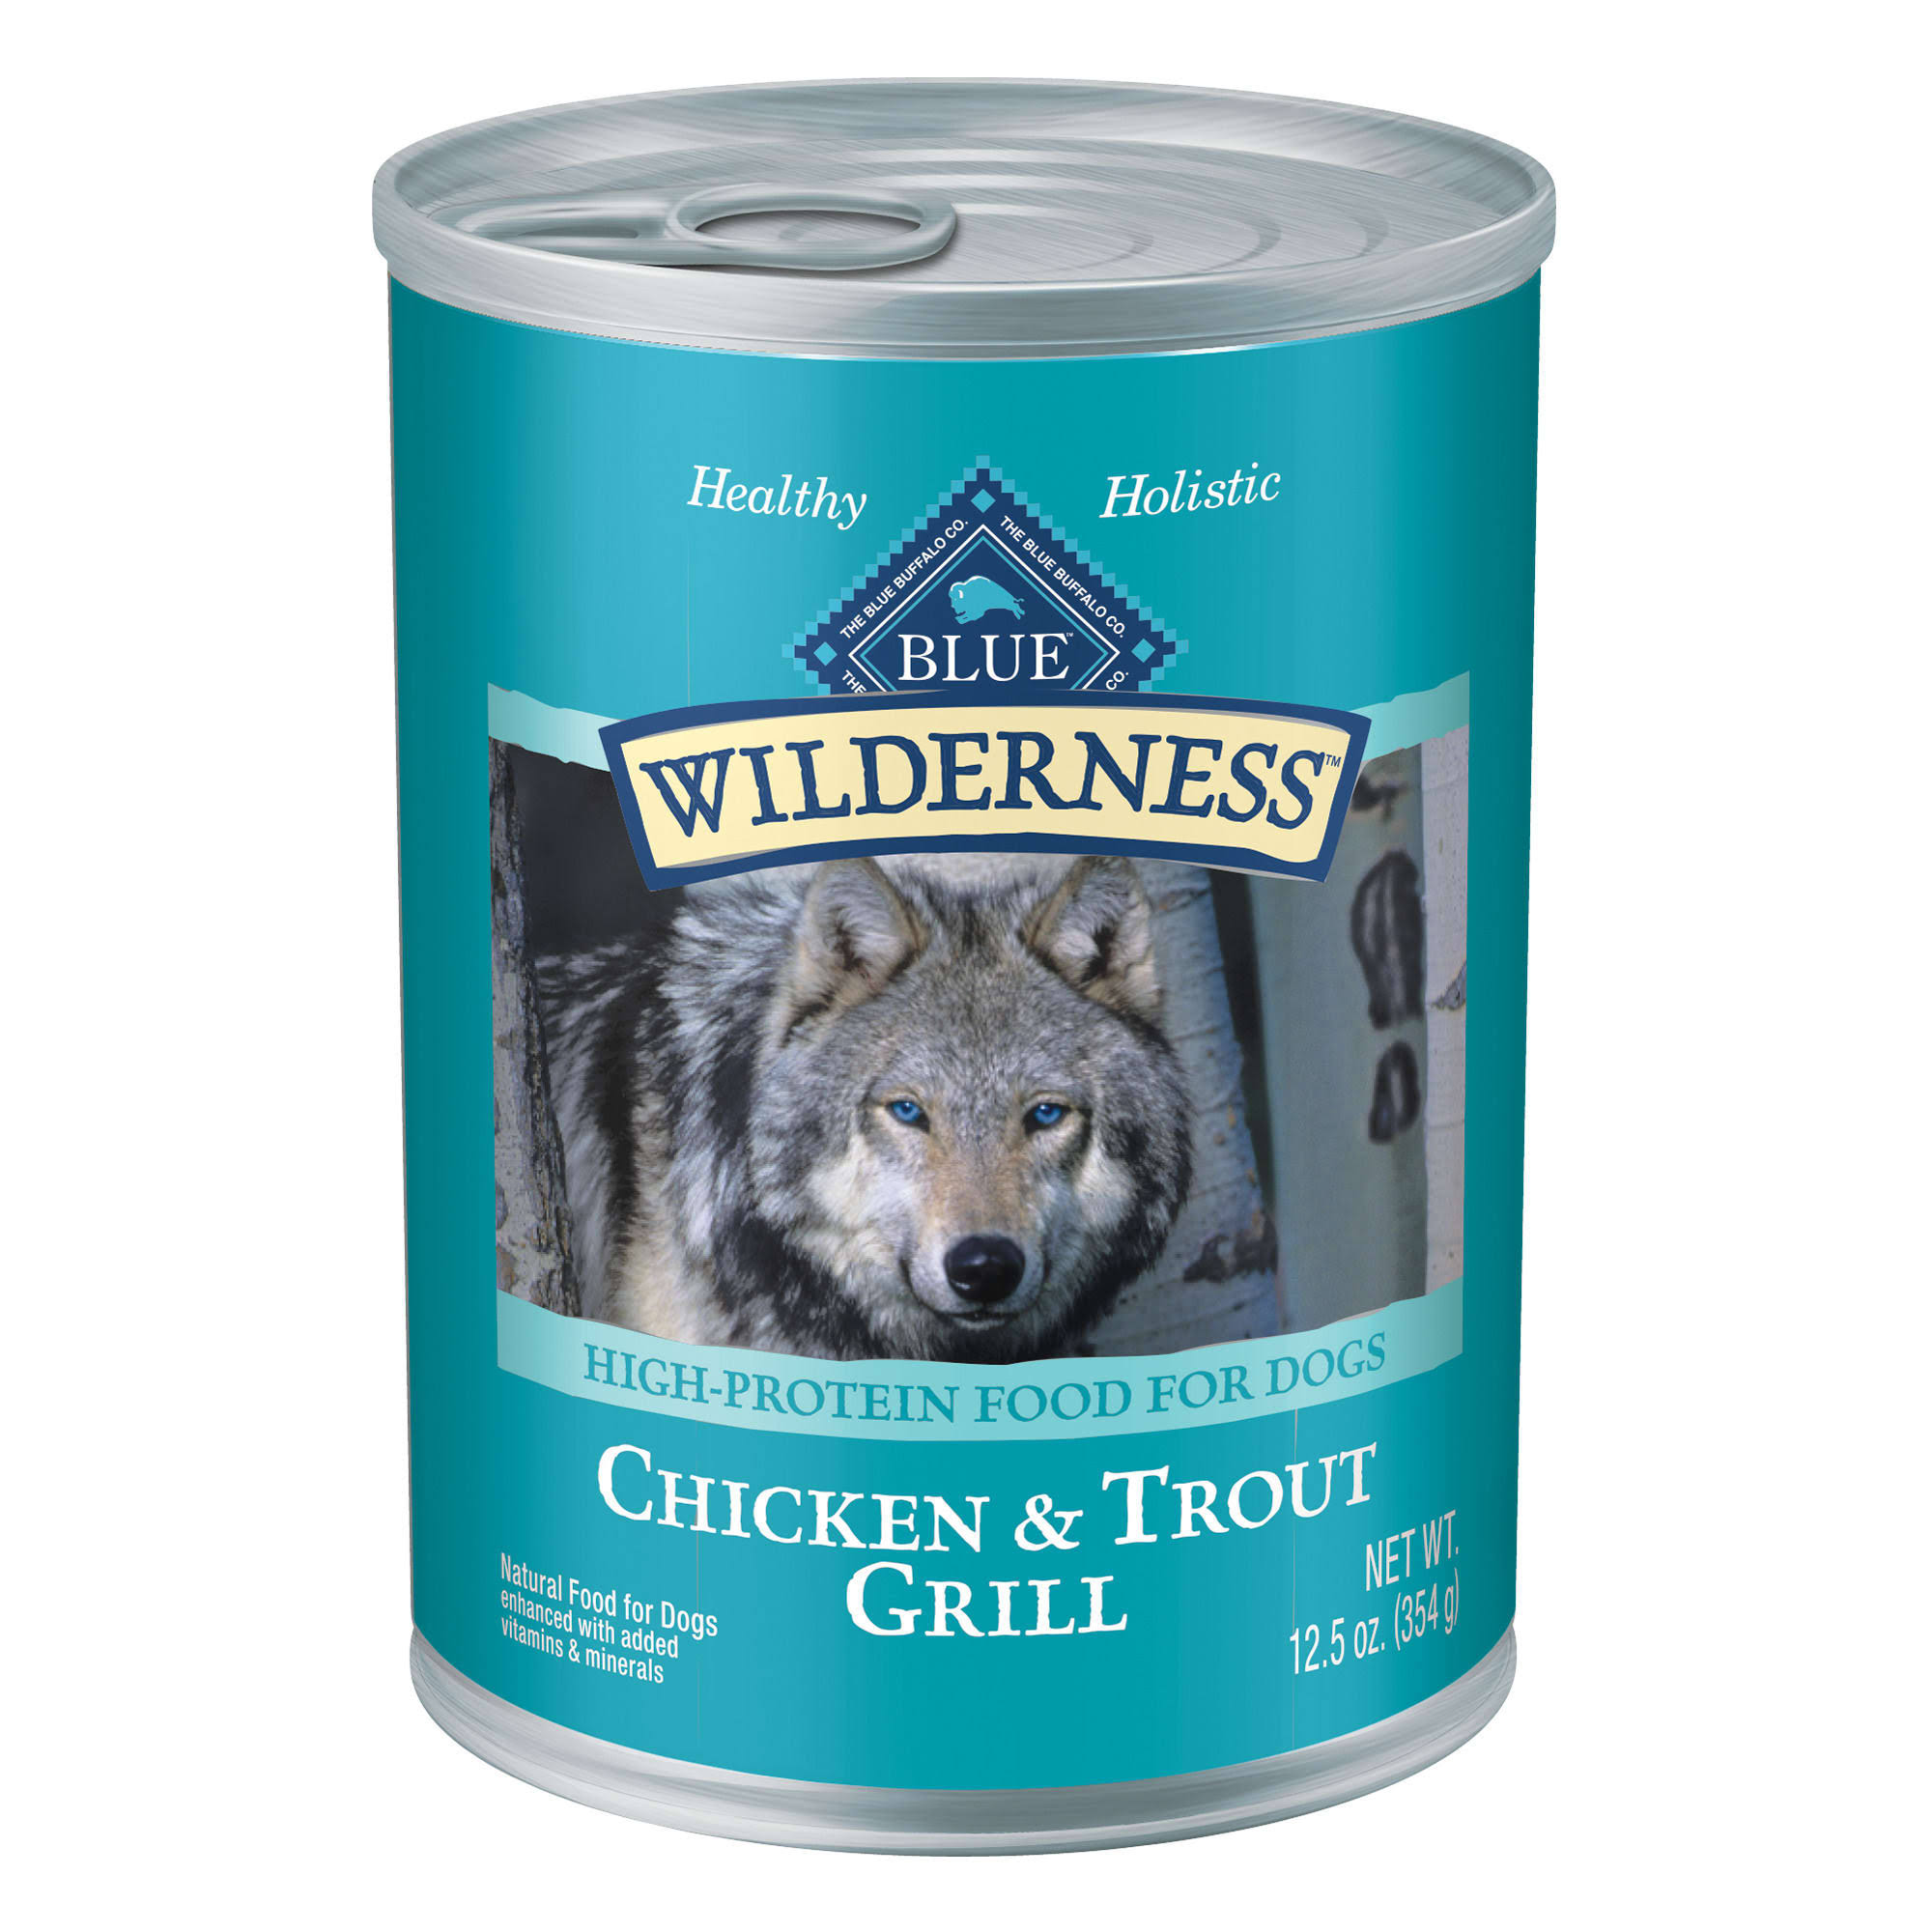 Blue Buffalo Wilderness Adult Dog Wet Food - Trout & Chicken Grill, 354g